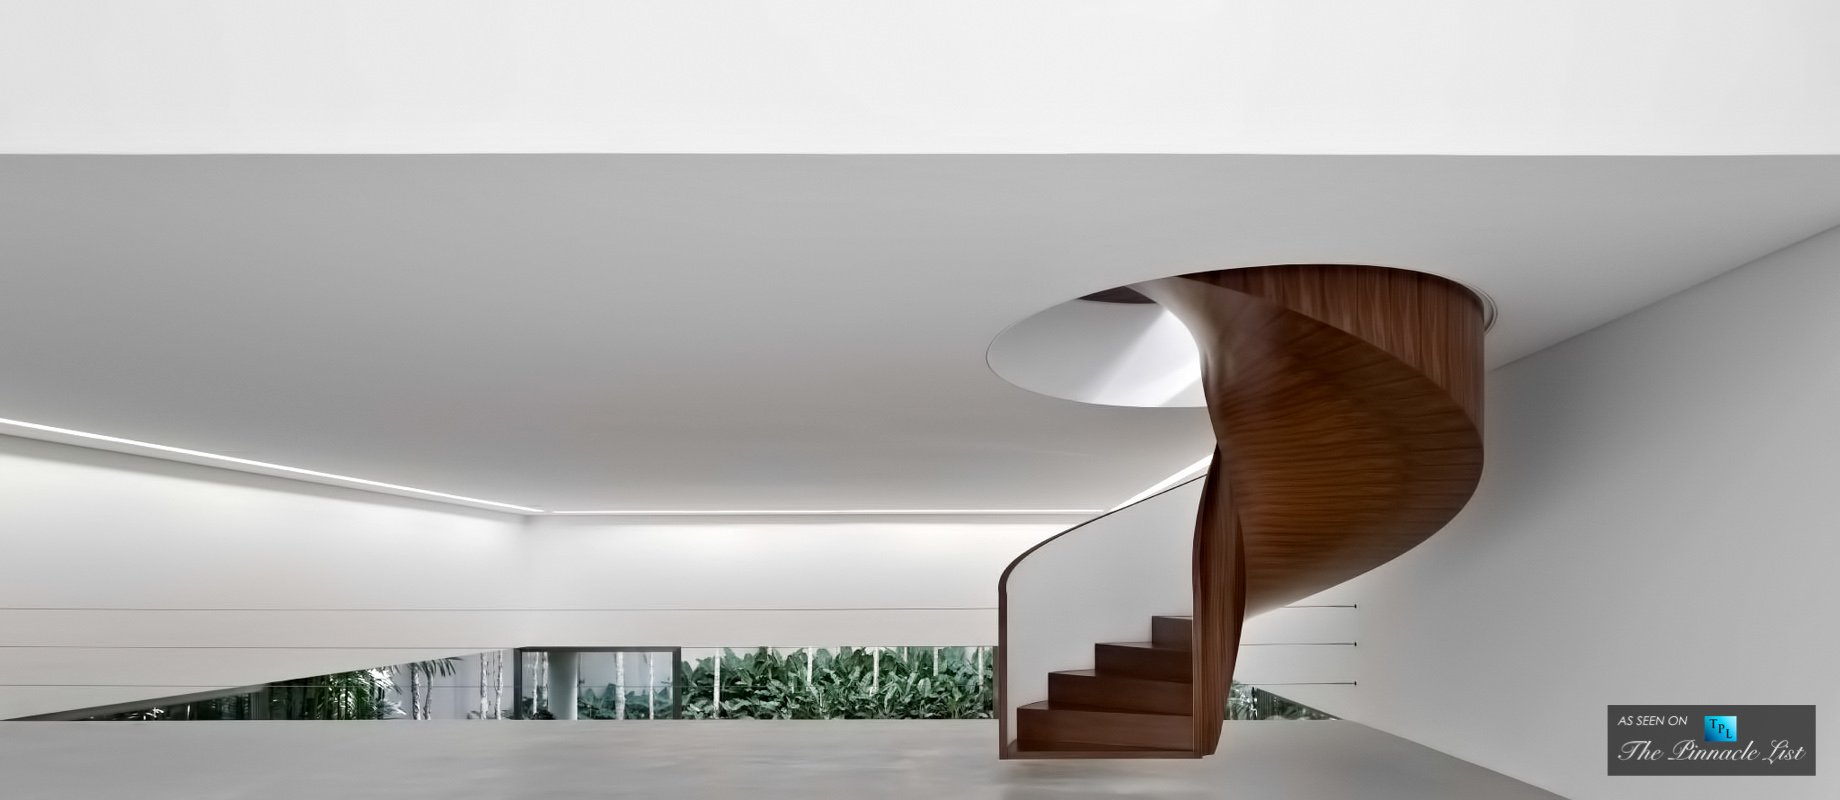 Casa Cubo Sao Paulo Brazil - Isay Weinfeld - A Global Architect with Timeless Modernist Sensibility